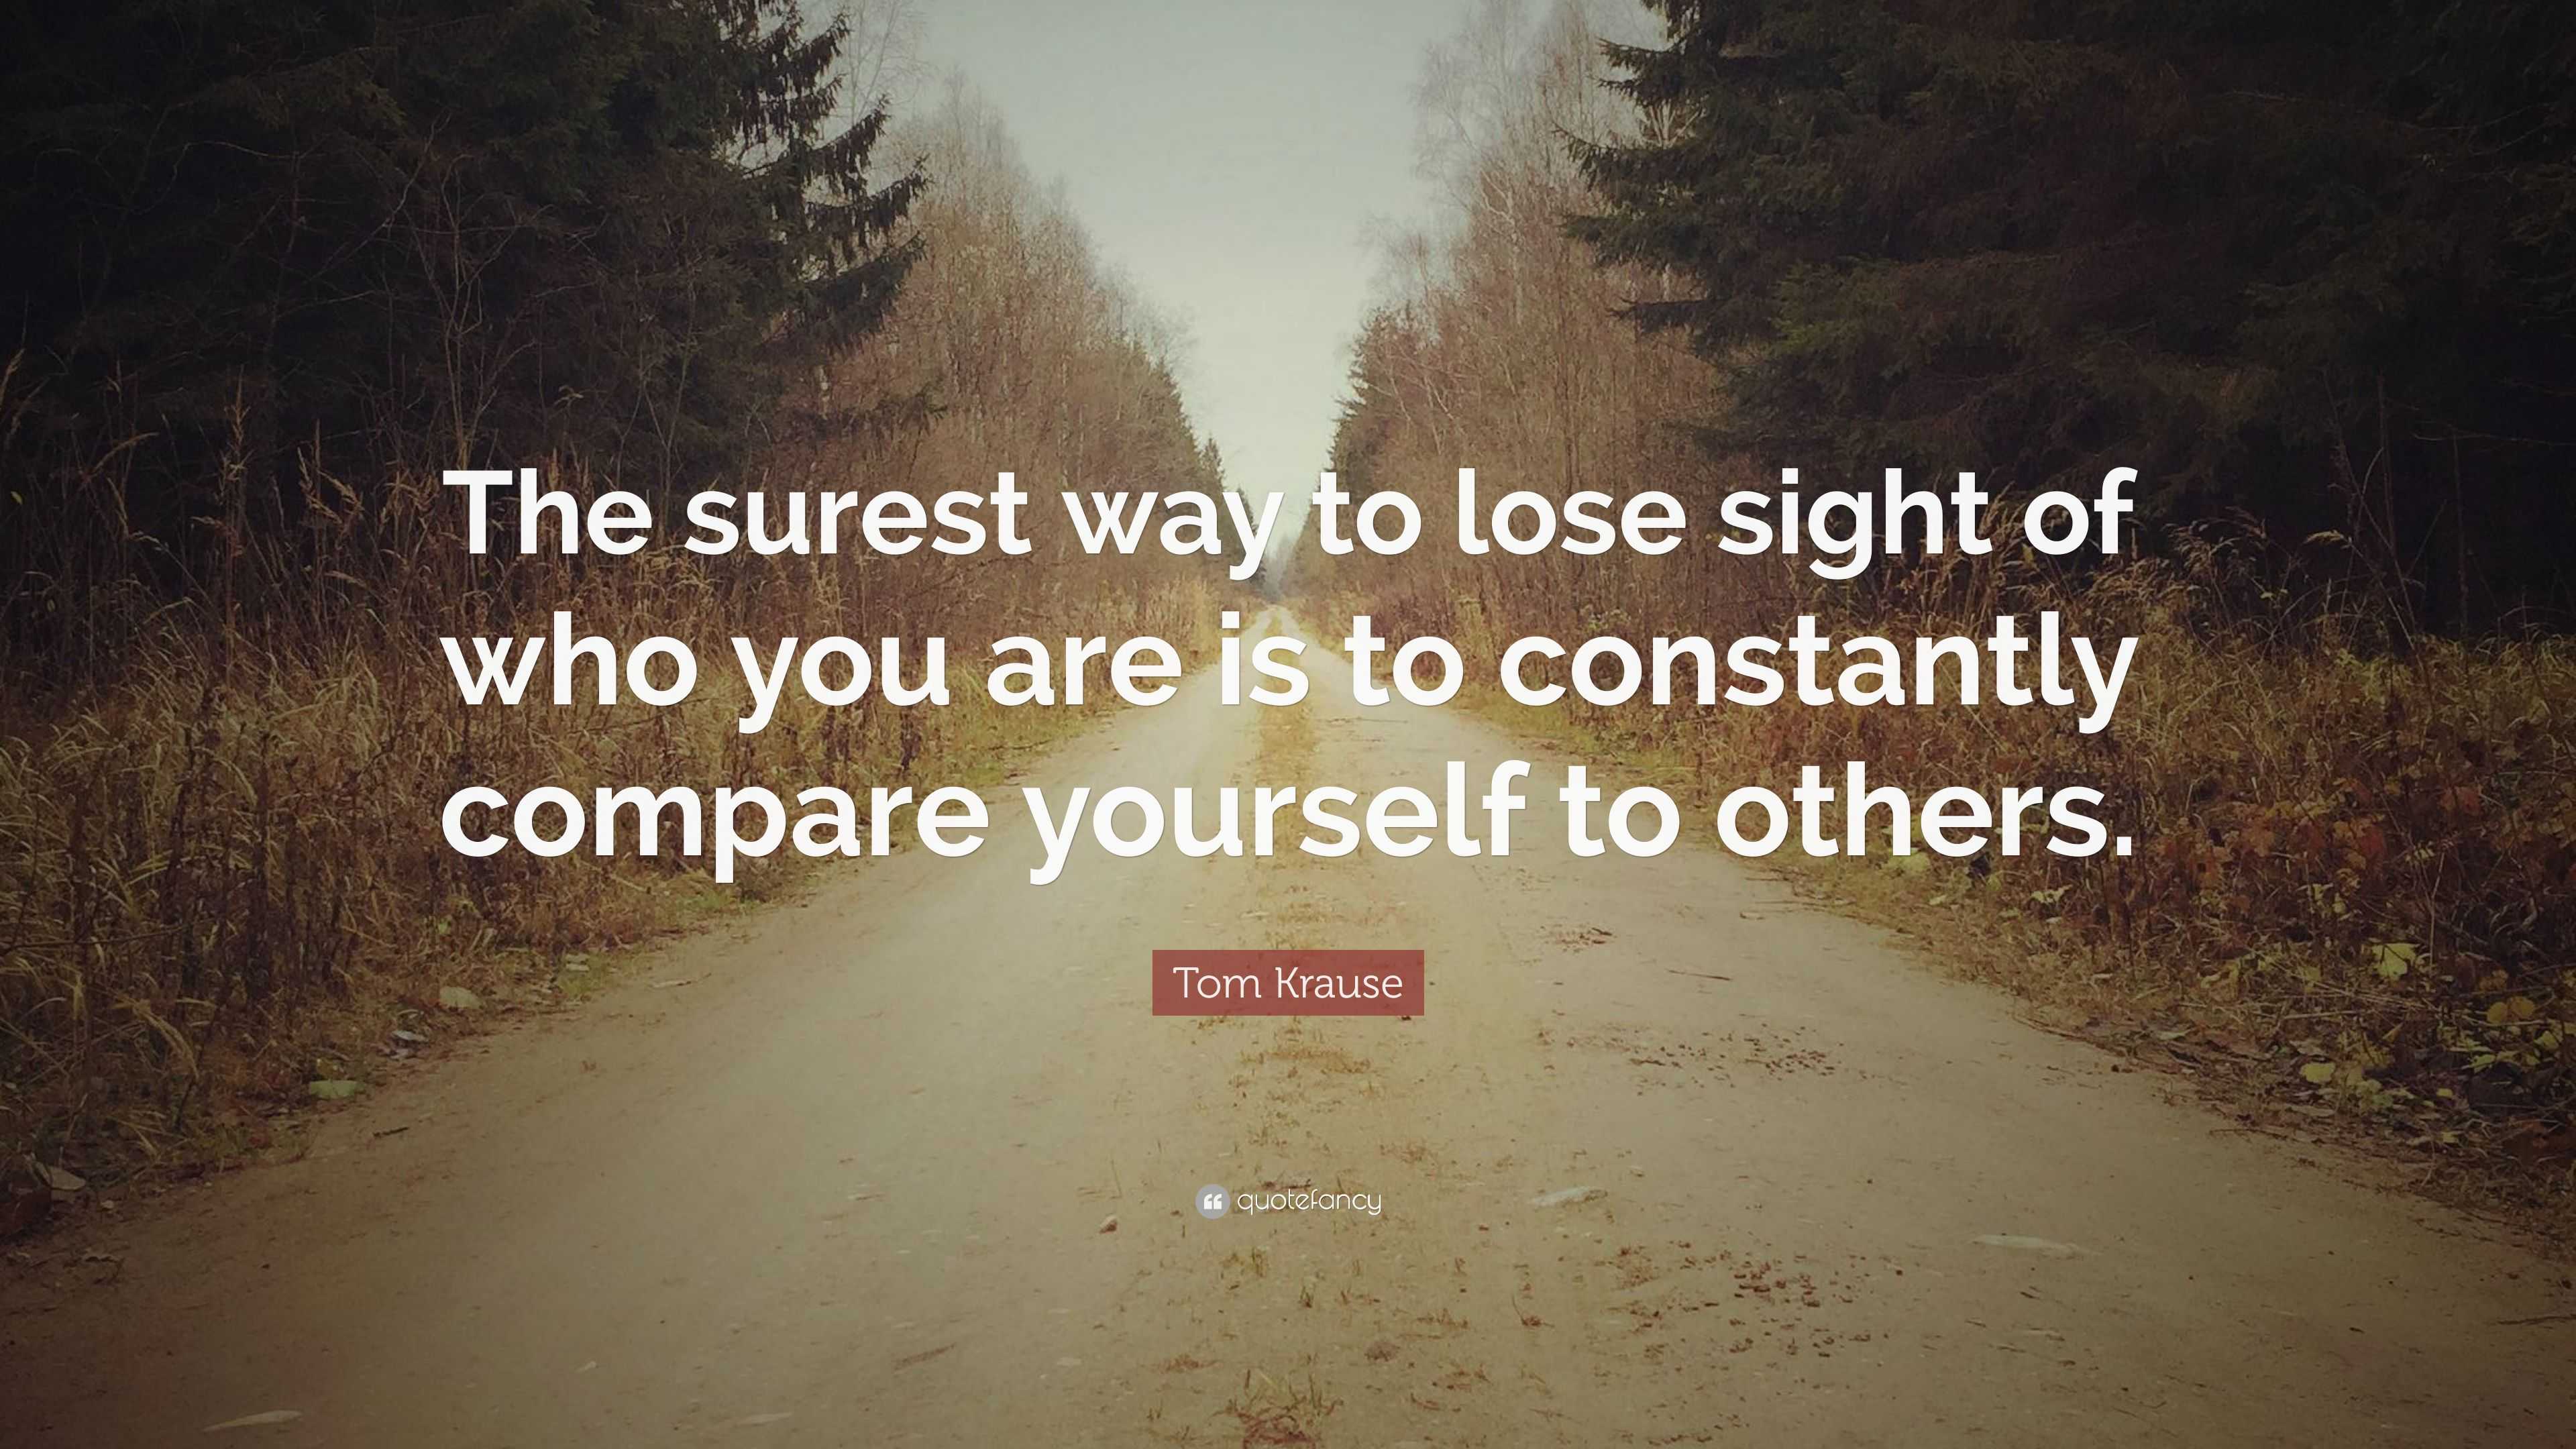 2055891 Tom Krause Quote The surest way to lose sight of who you are is to